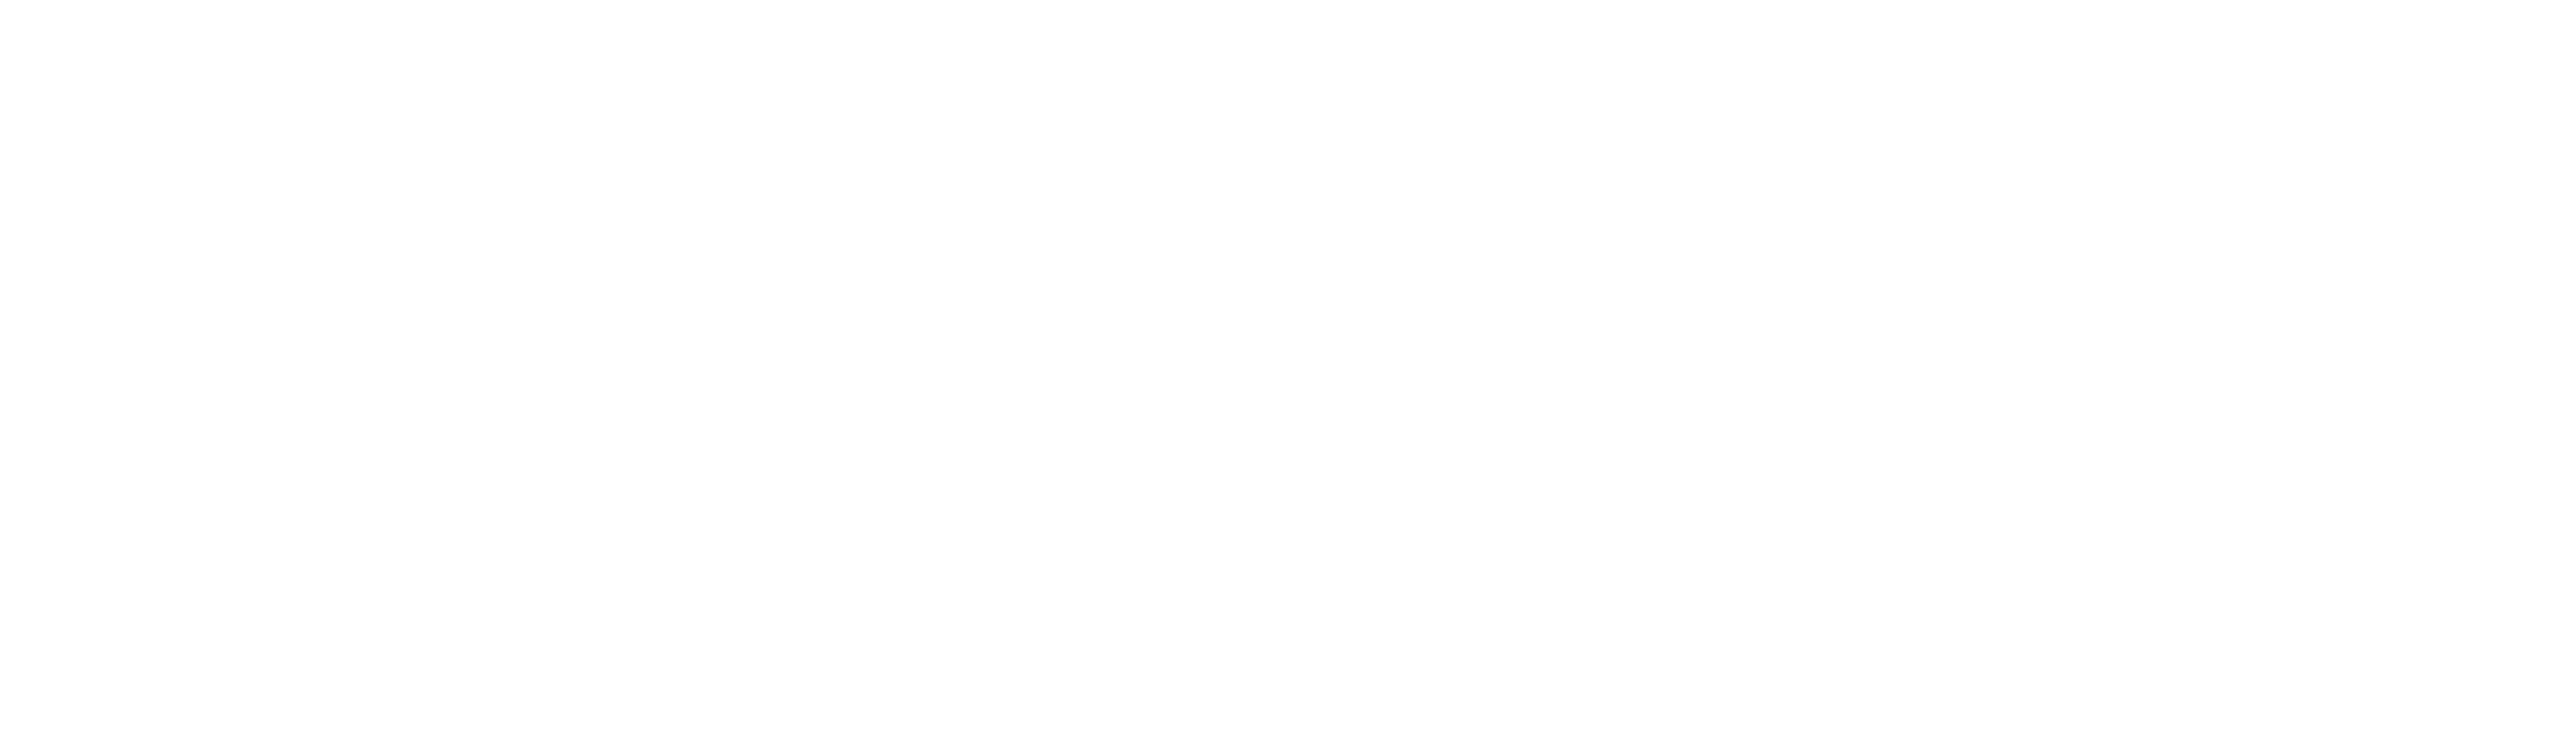 bs partners